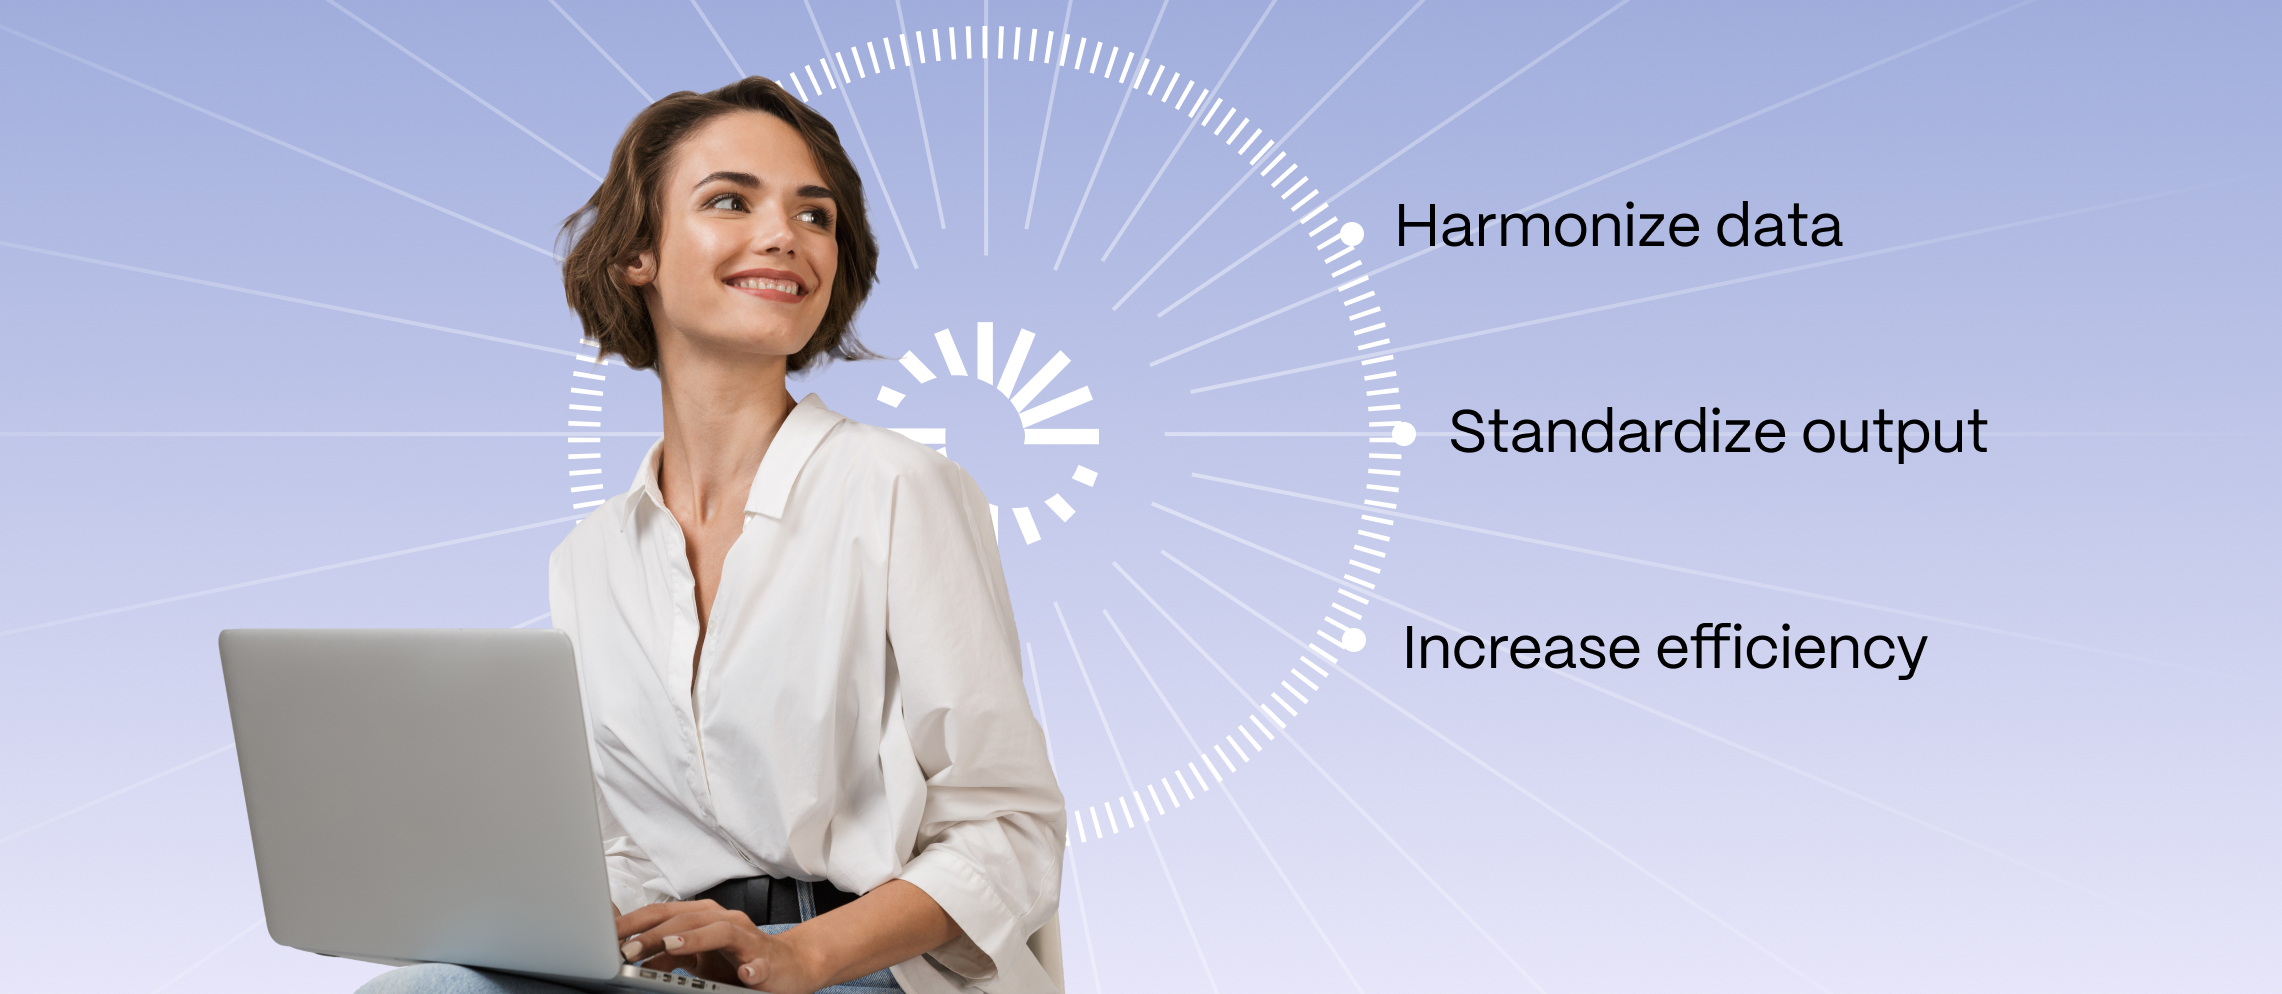 Woman on computer with bullet points: harmonize data, standardize output, and increase efficiency